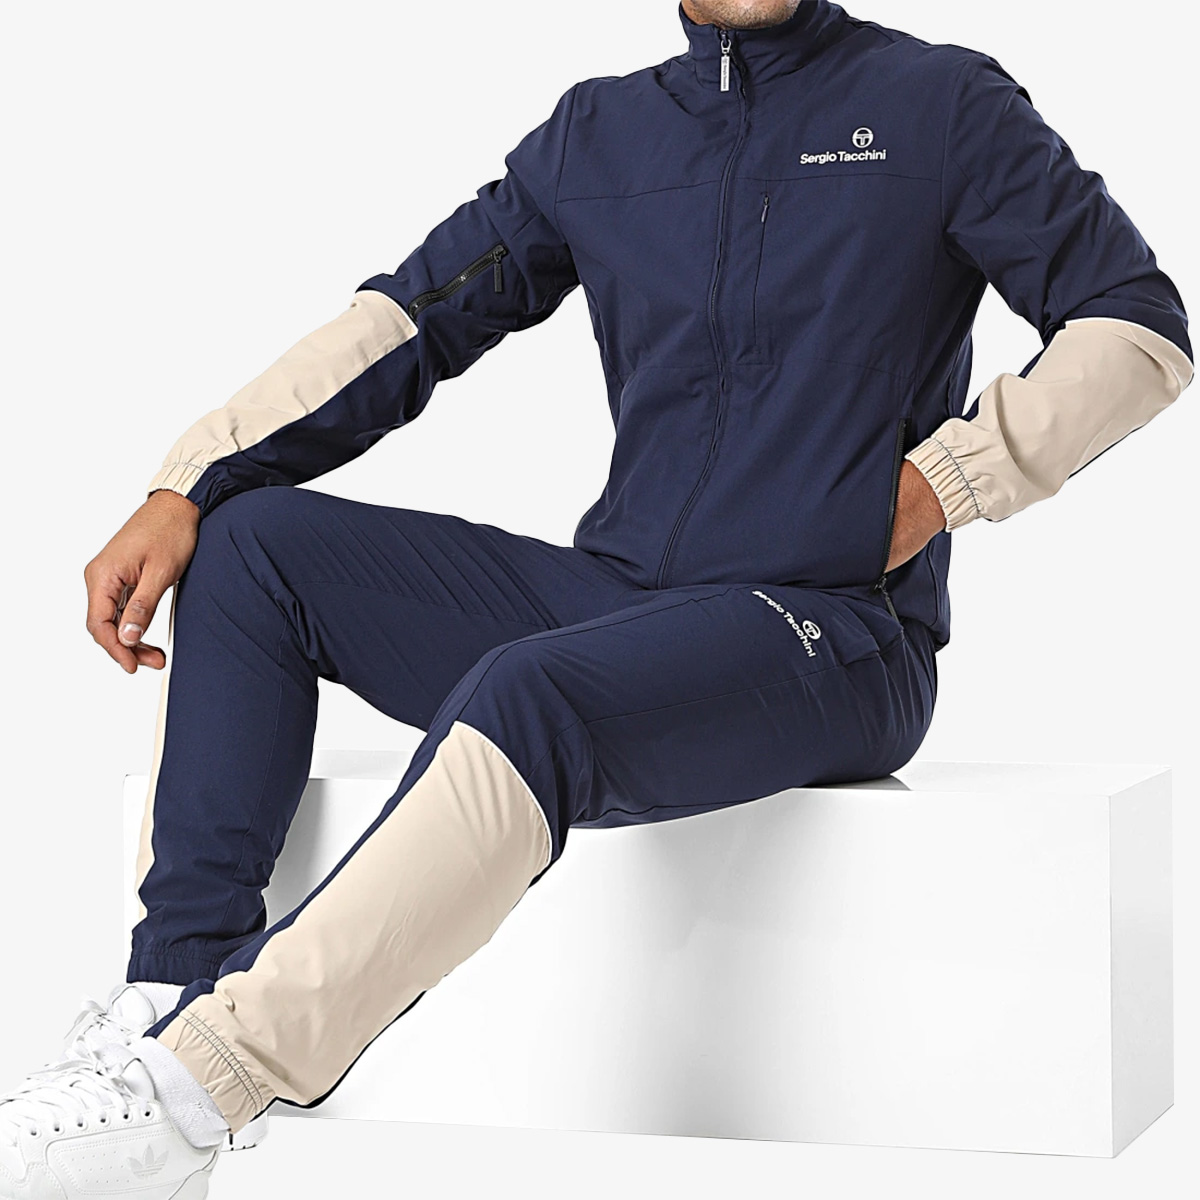 OPEN TRACKSUIT 